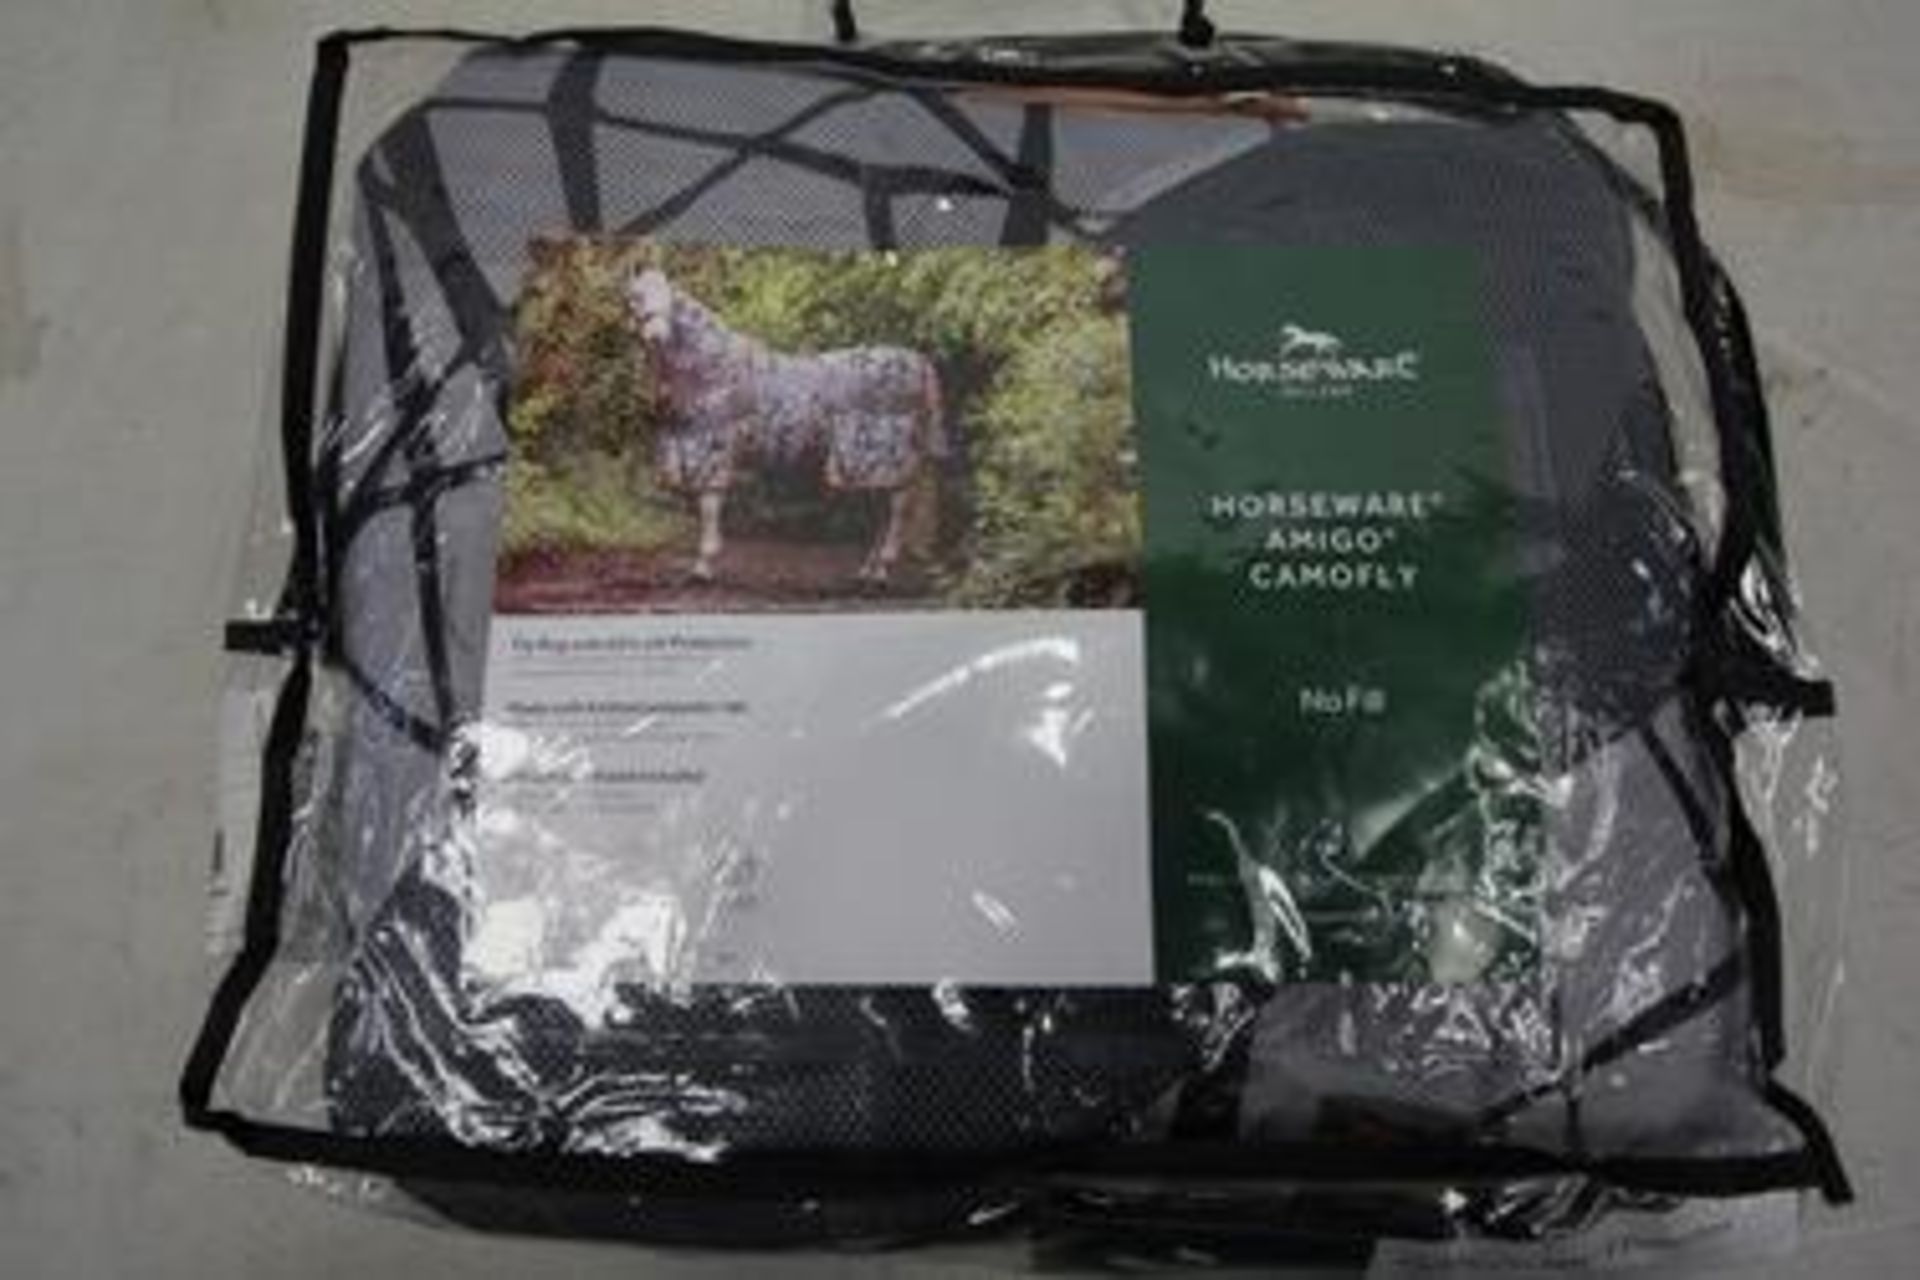 1 x Horseware Amigo Camo Fly no fill fly rug with detachable hood, size 6'6" - New in pack (GS17)